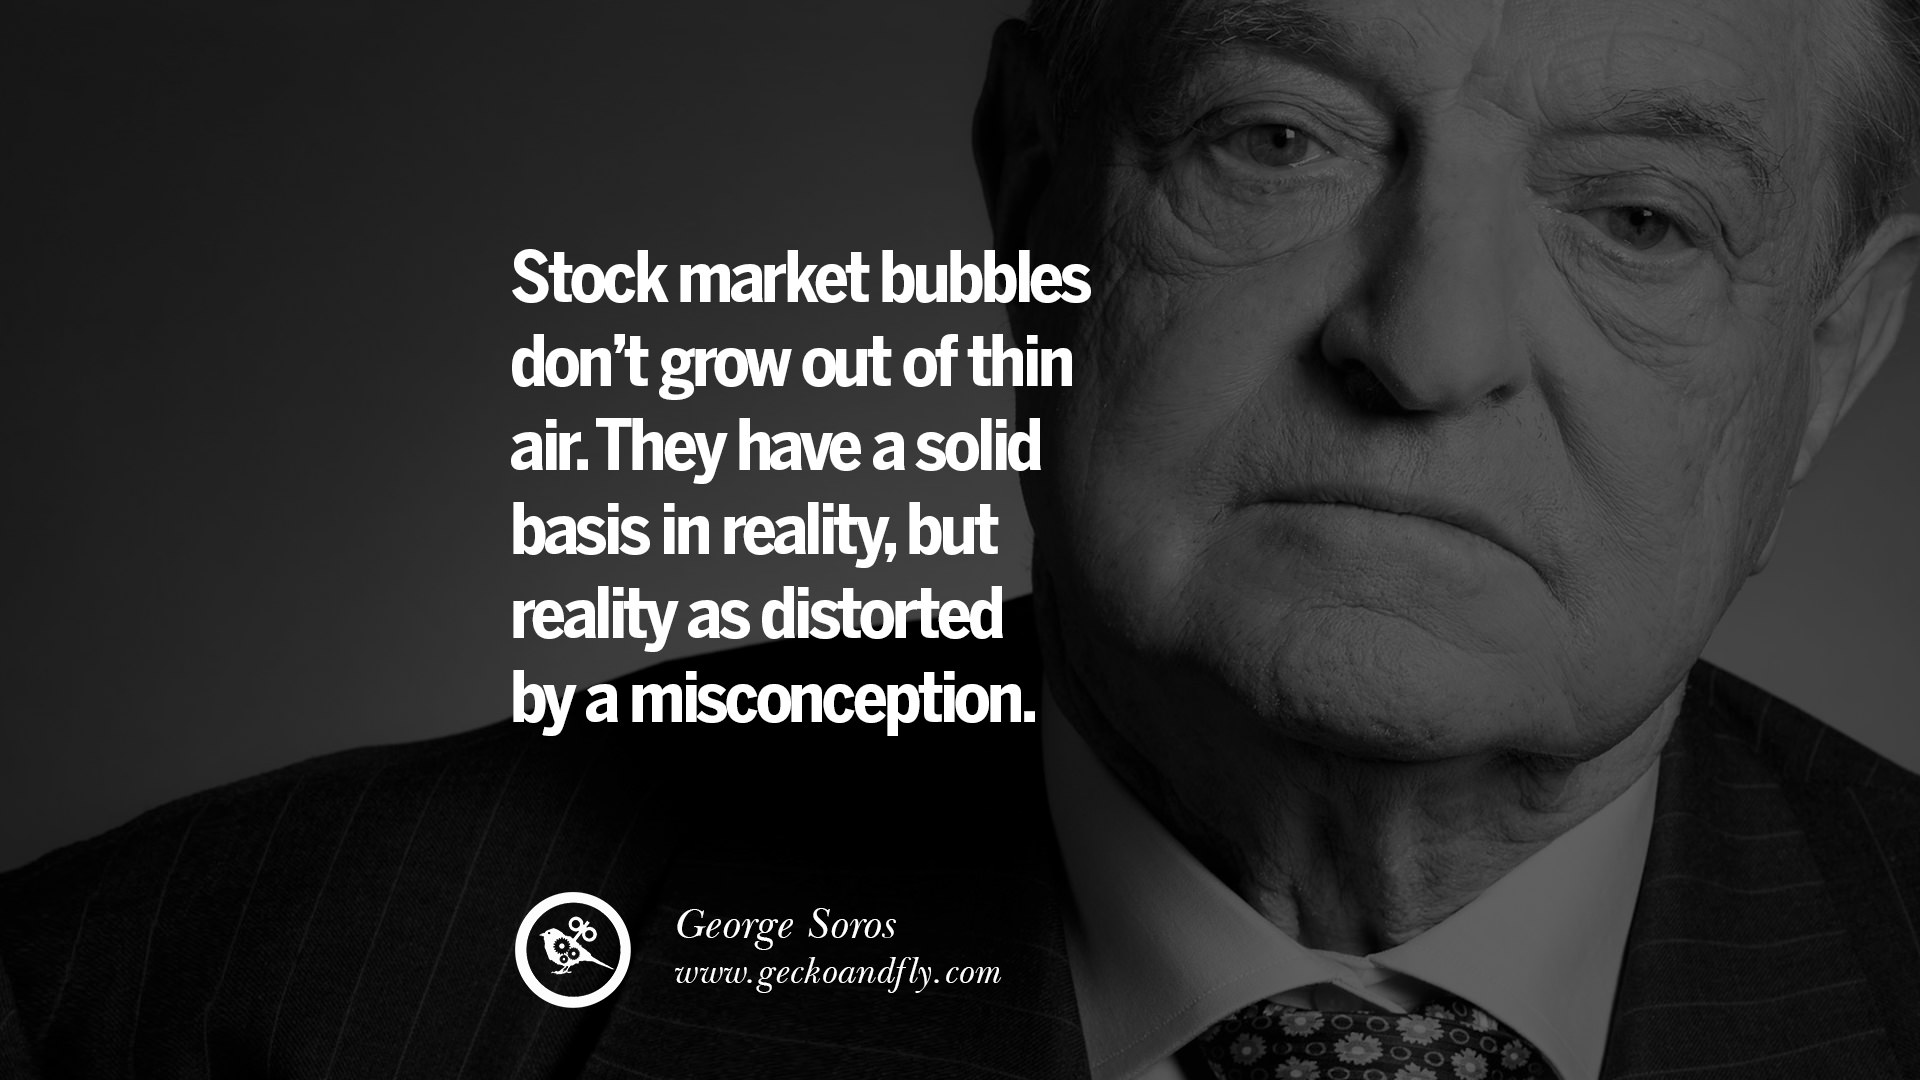 20 Inspiring Stock Market Investment Quotes by Successful Investors1920 x 1080